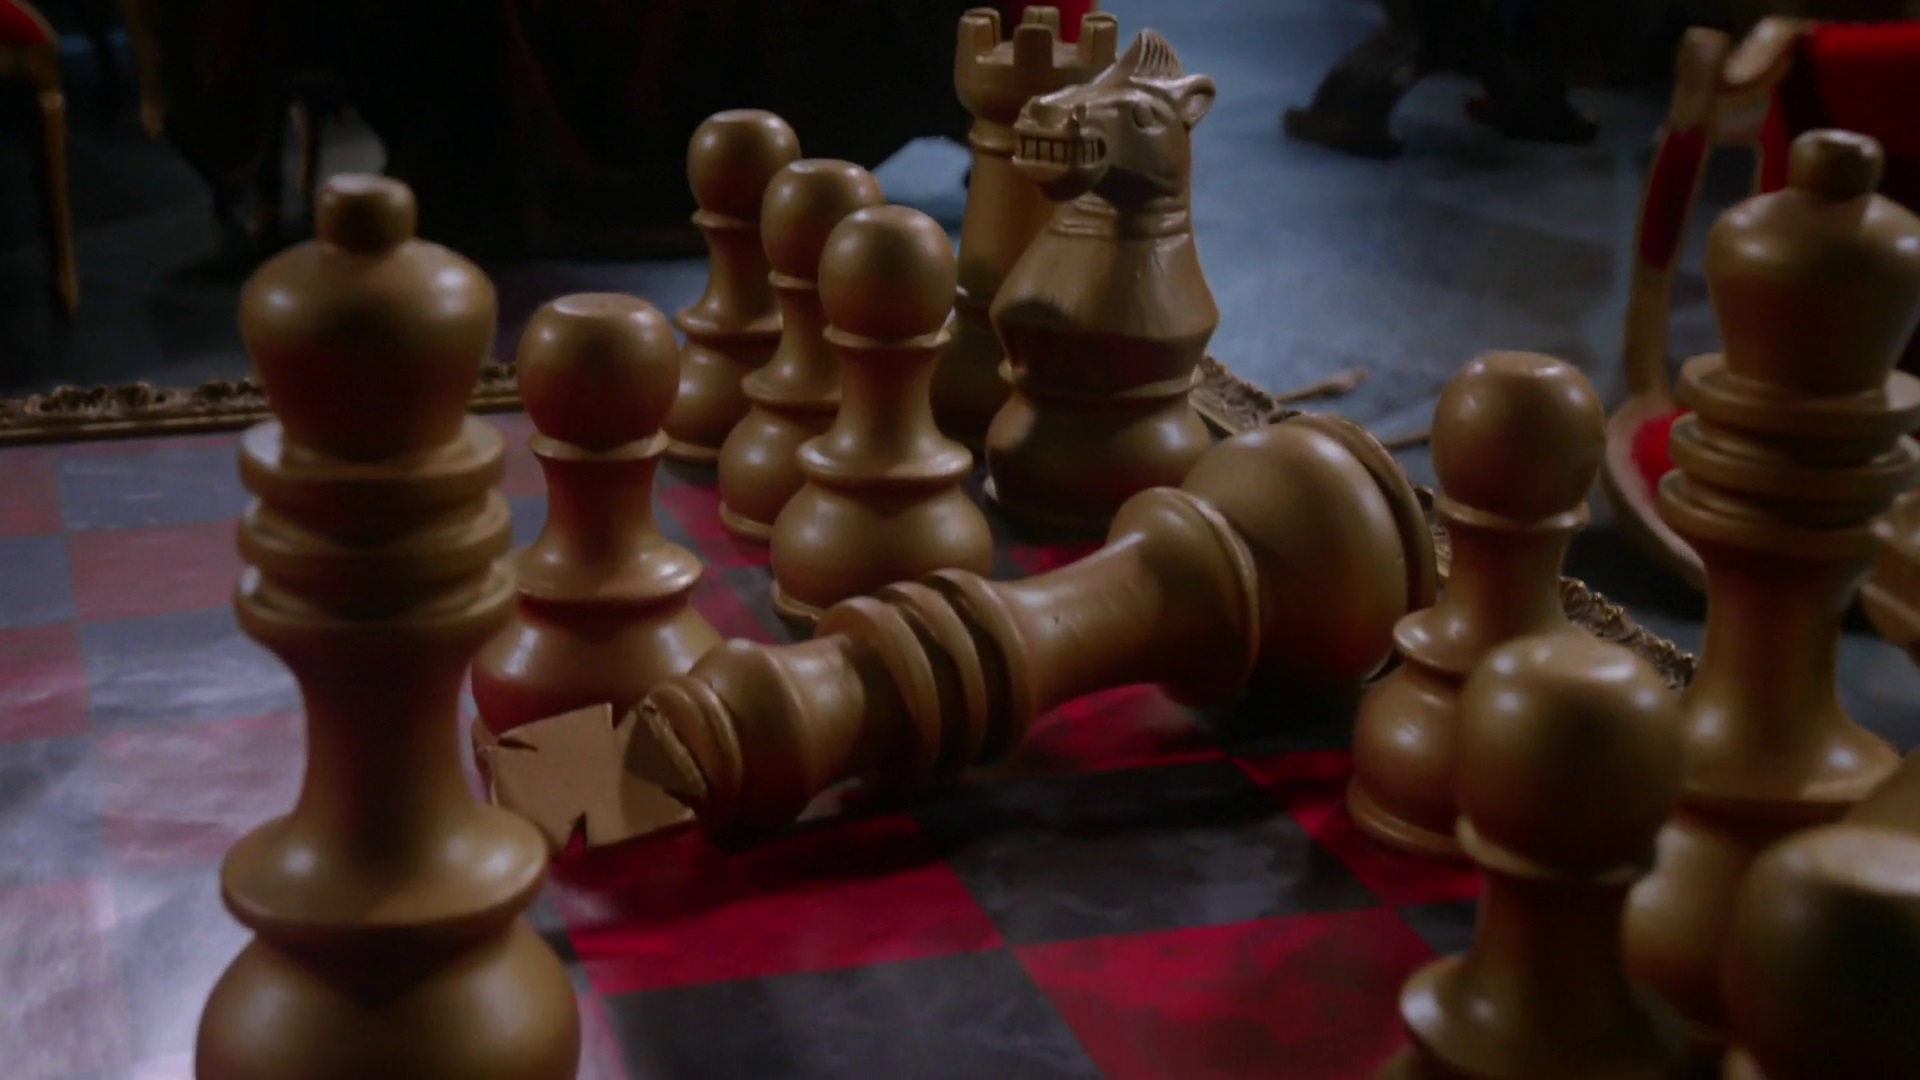 King Chess Piece Fell - 1x13 And They Lived Once Upon a Time in Wonderland Podcast